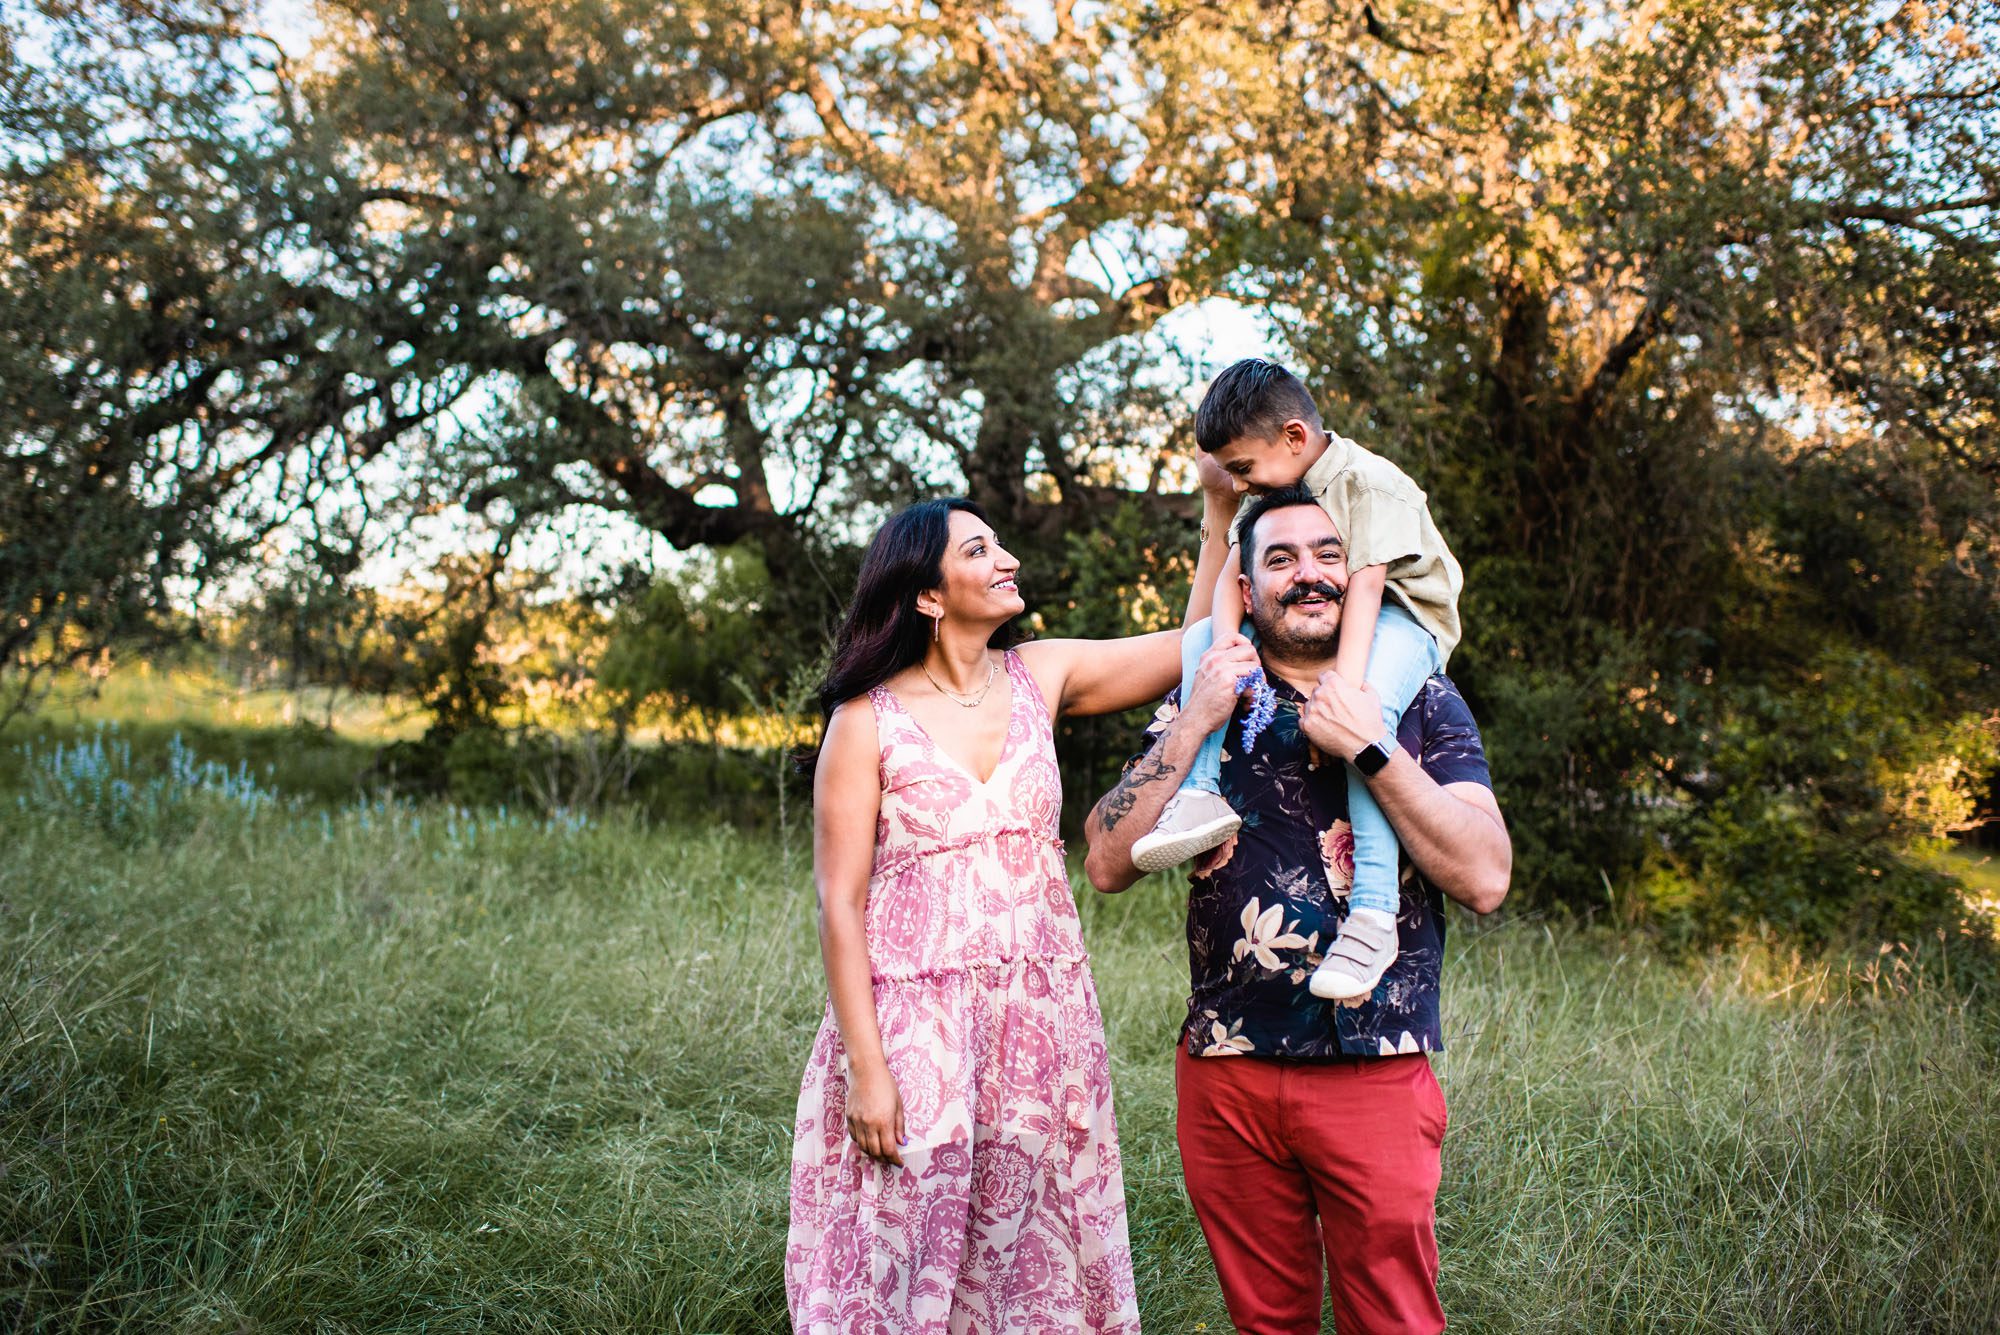 Family standing together in grassy field with oak trees, Family photographer in San Antonio